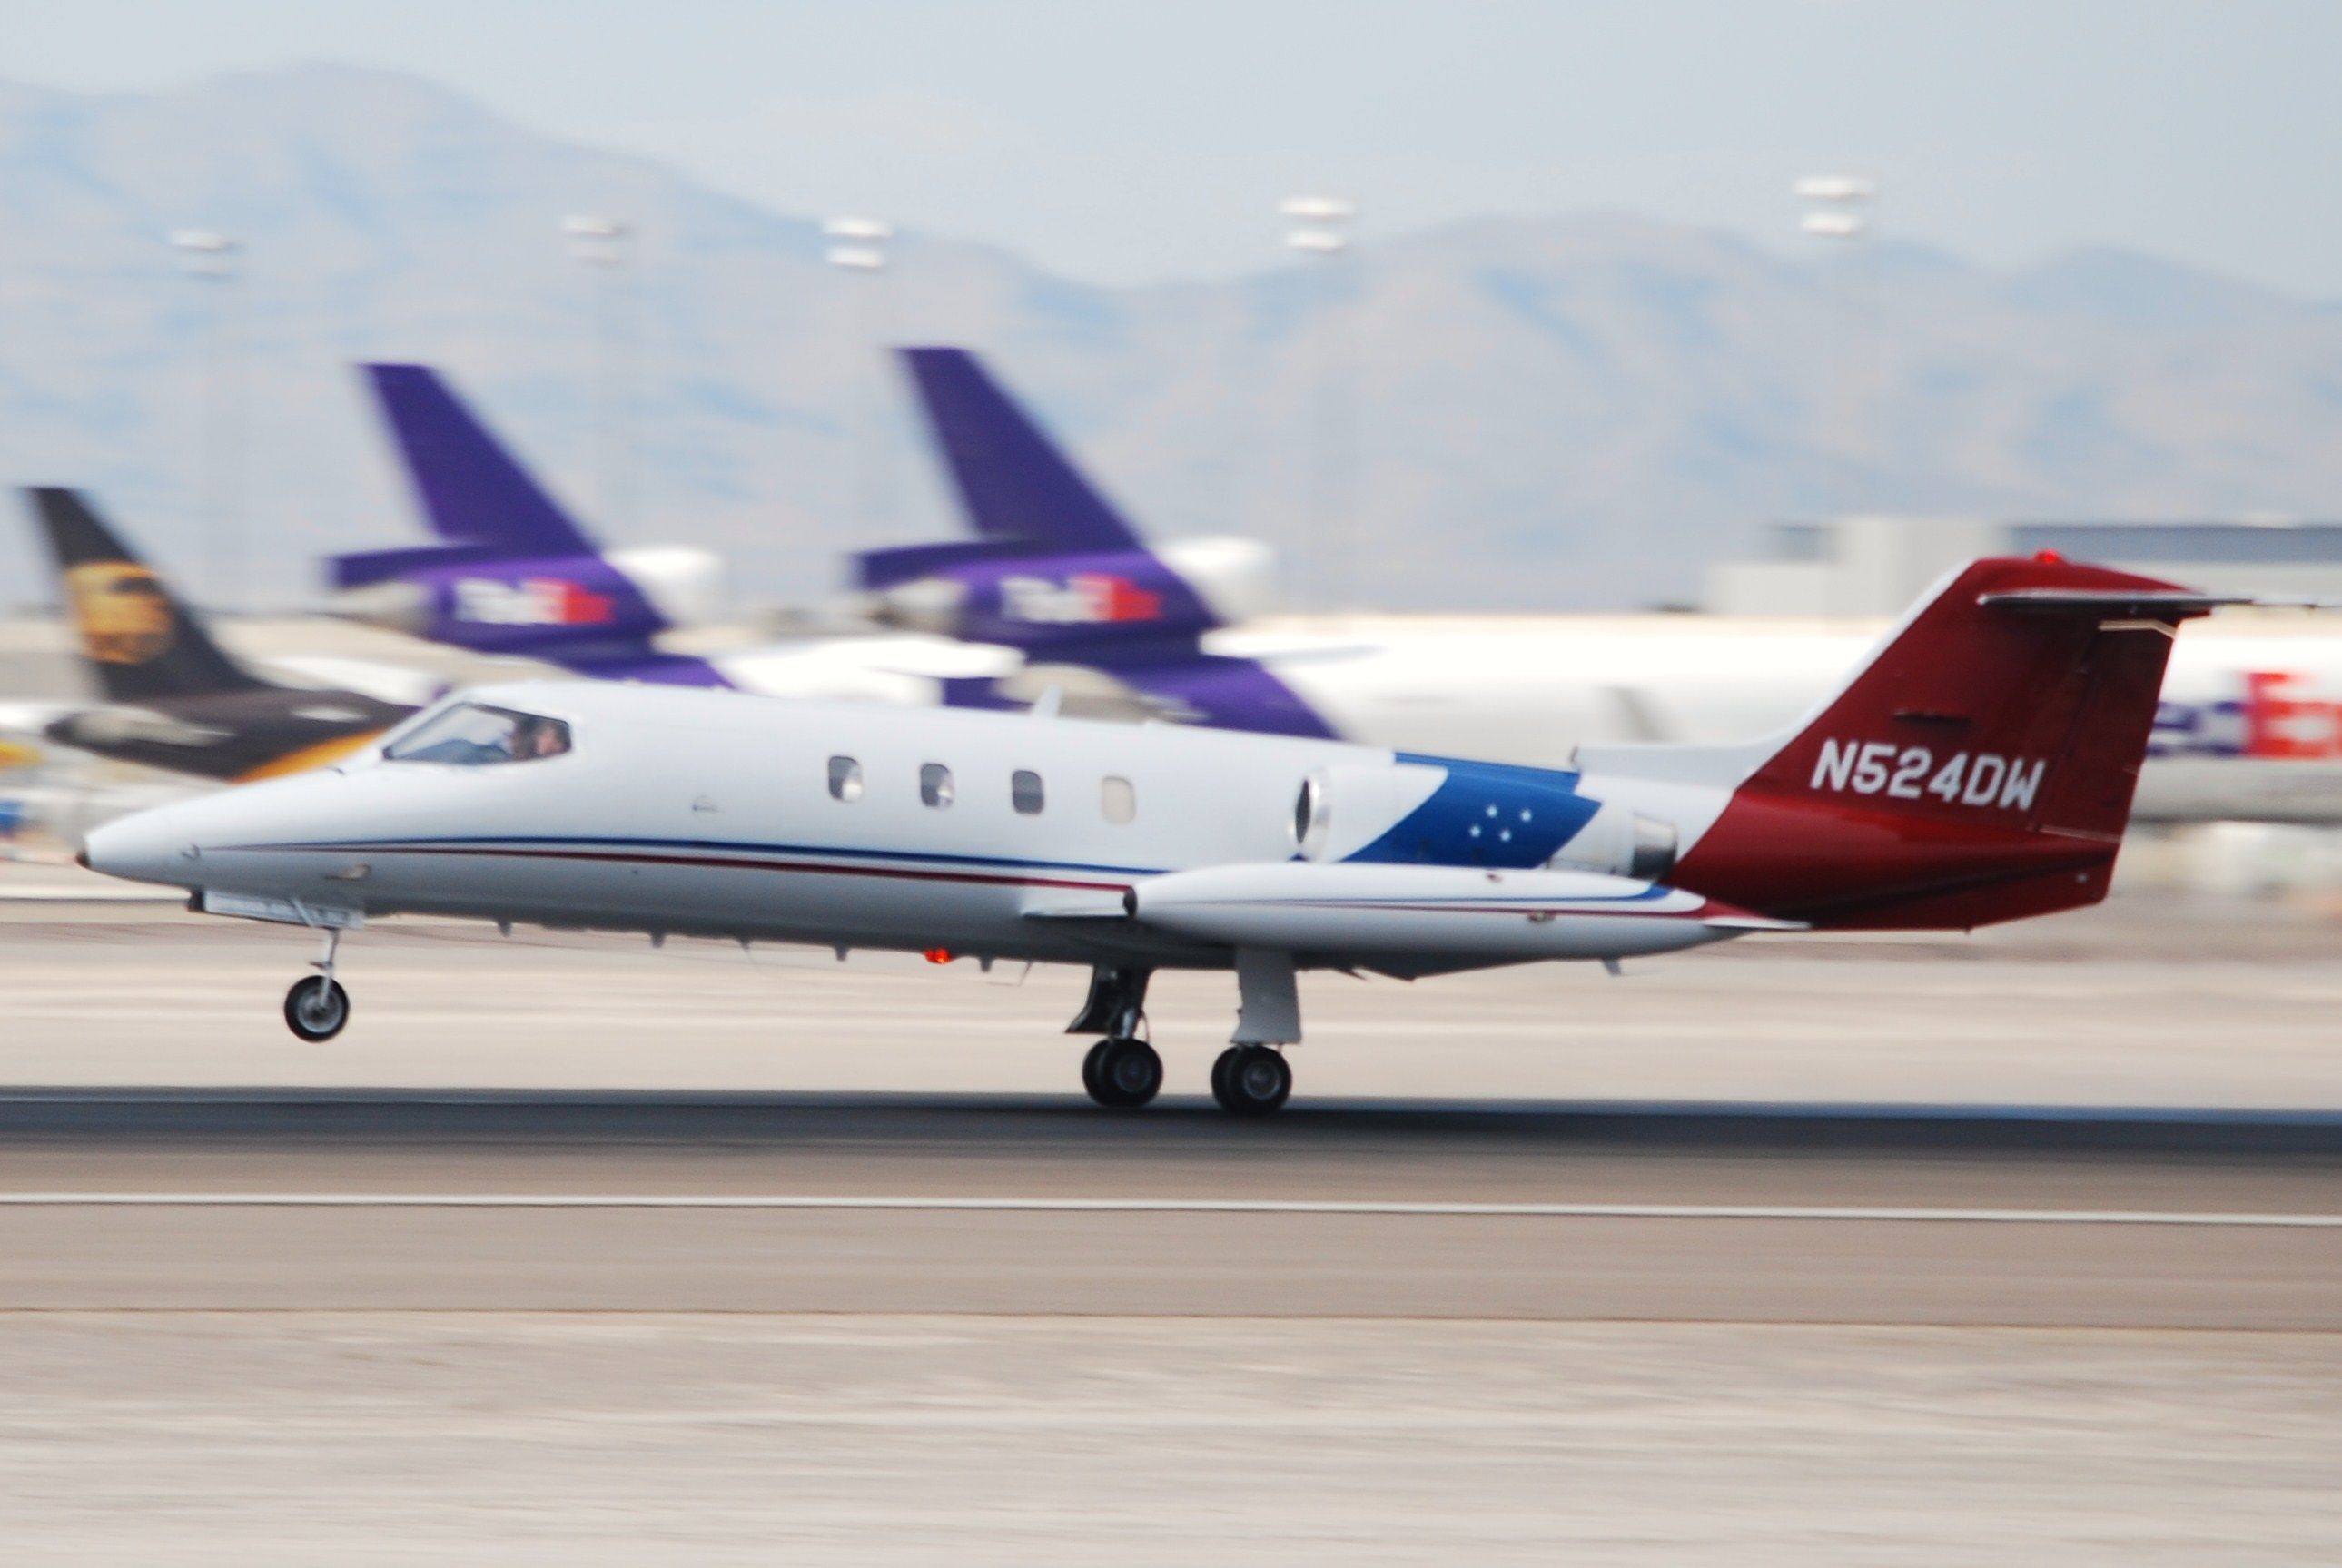 A Learjet 25 taking off from a runway.